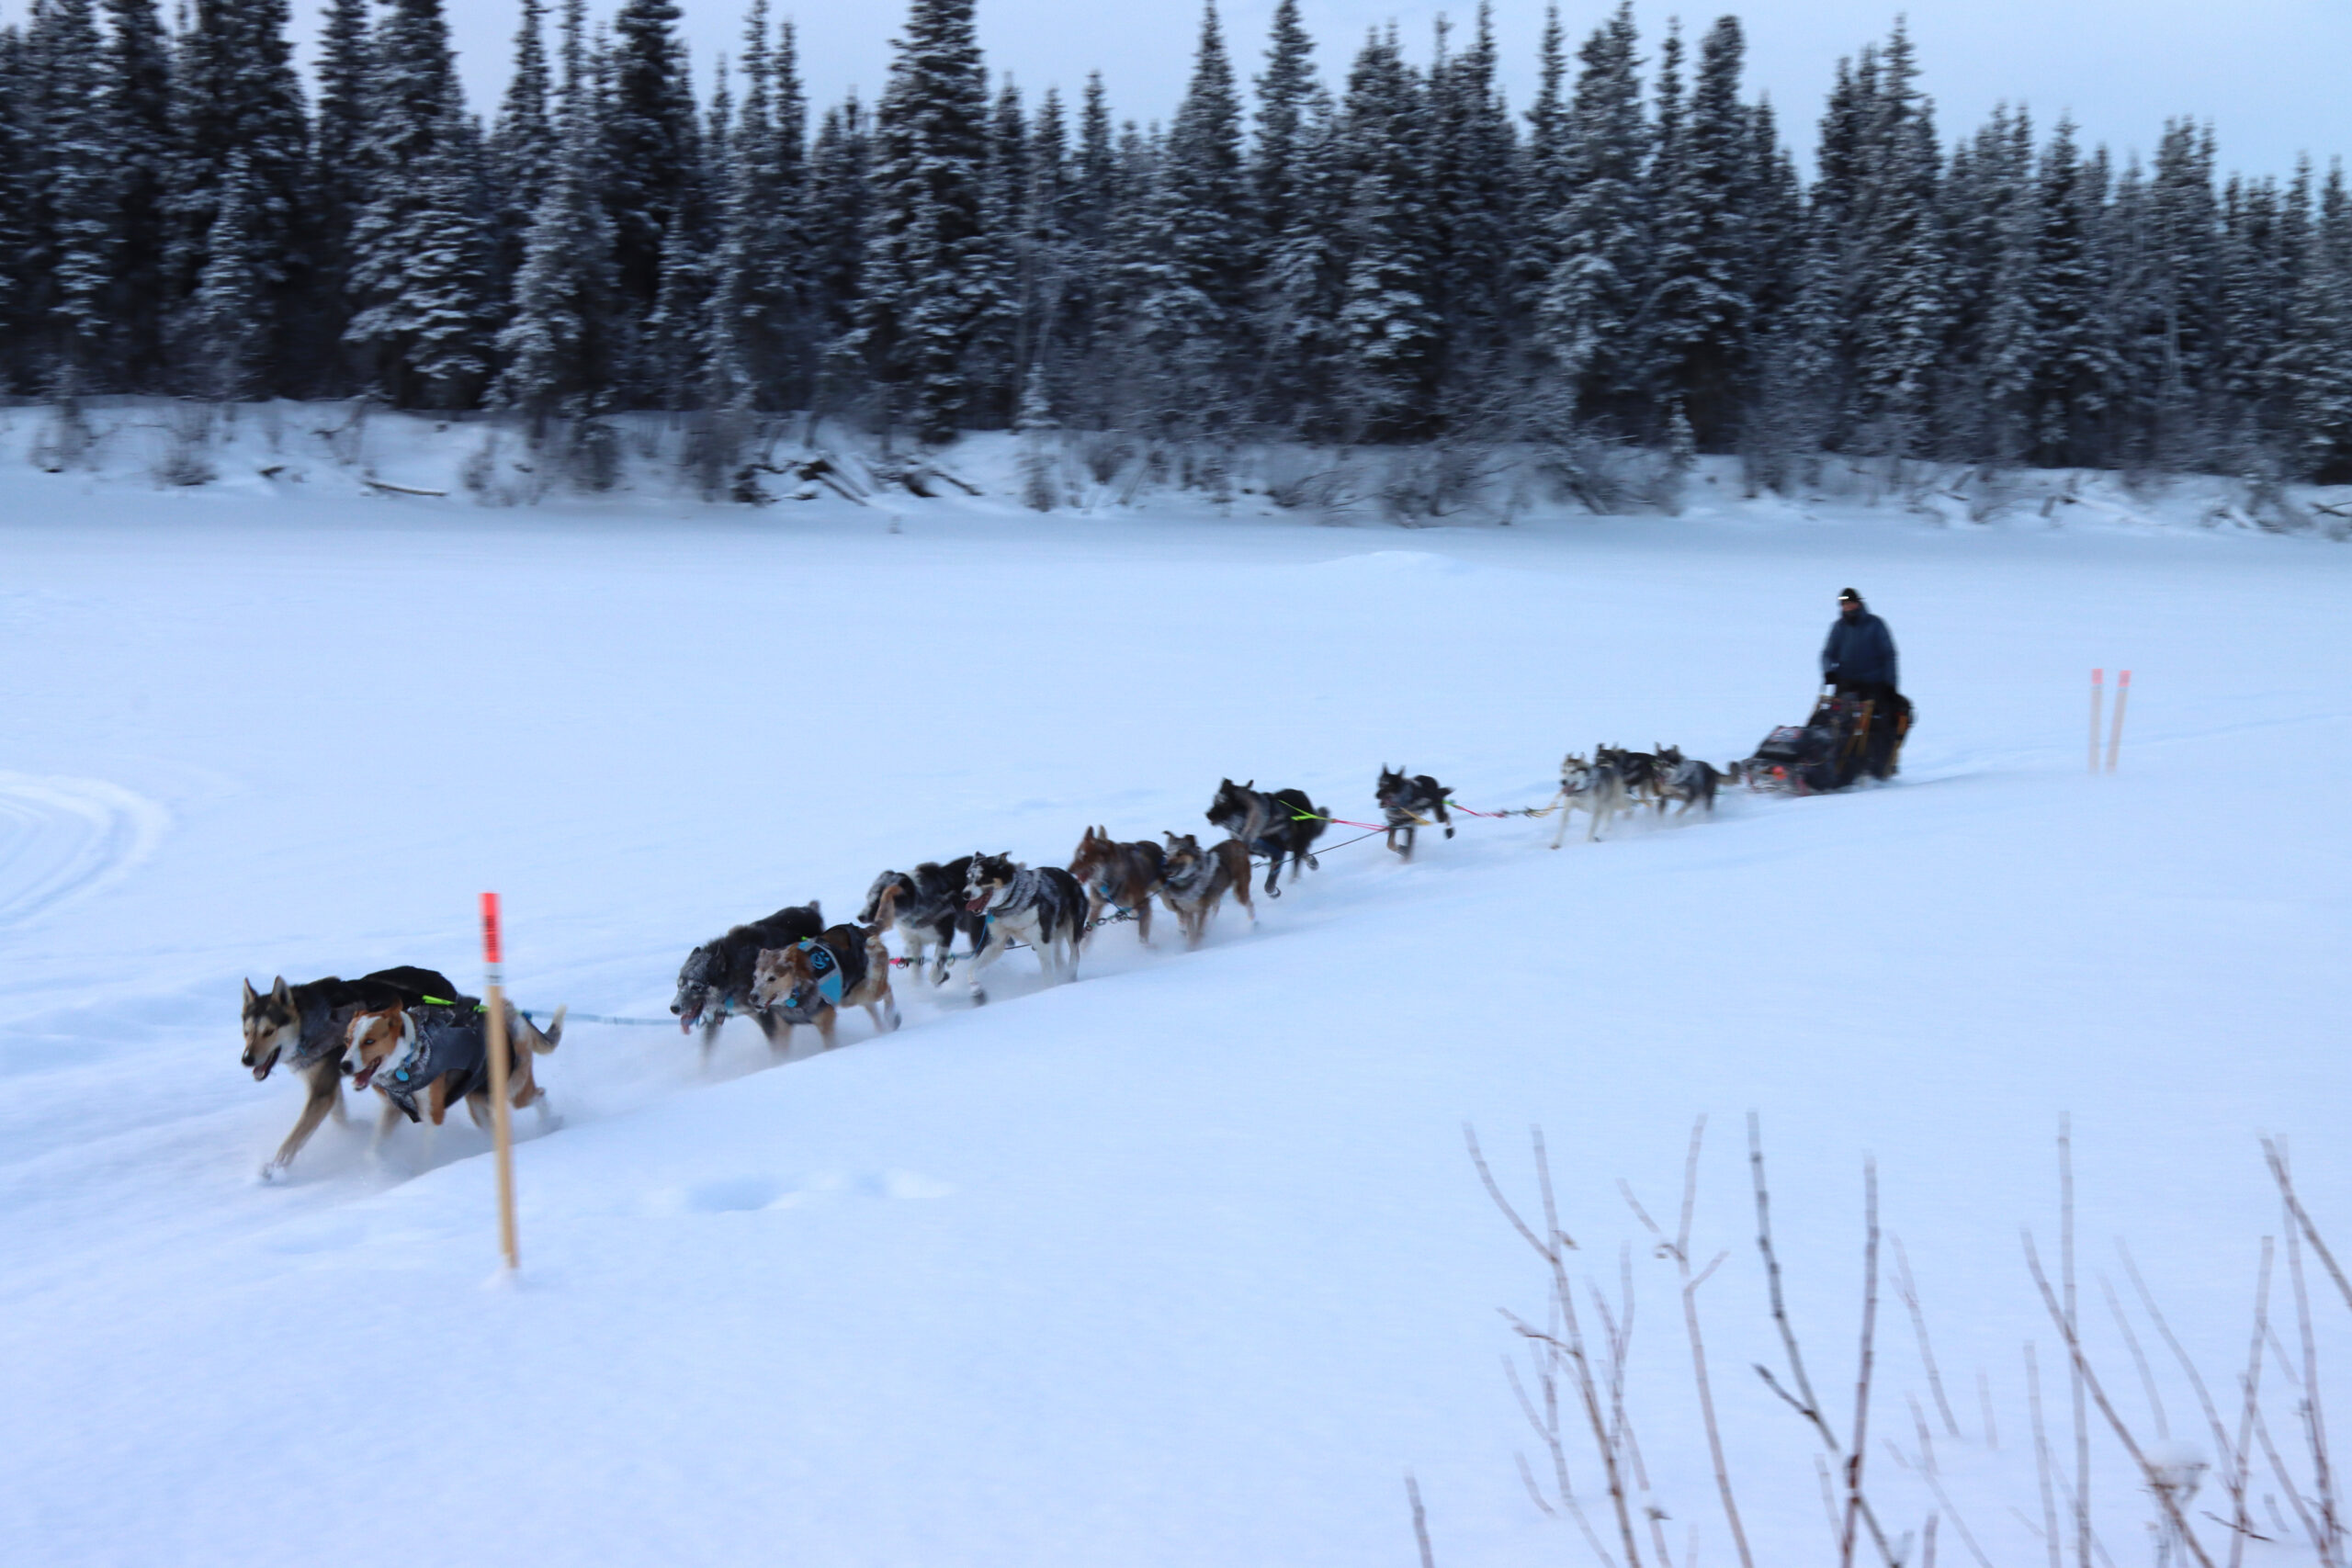 a musher and dog team in the snow